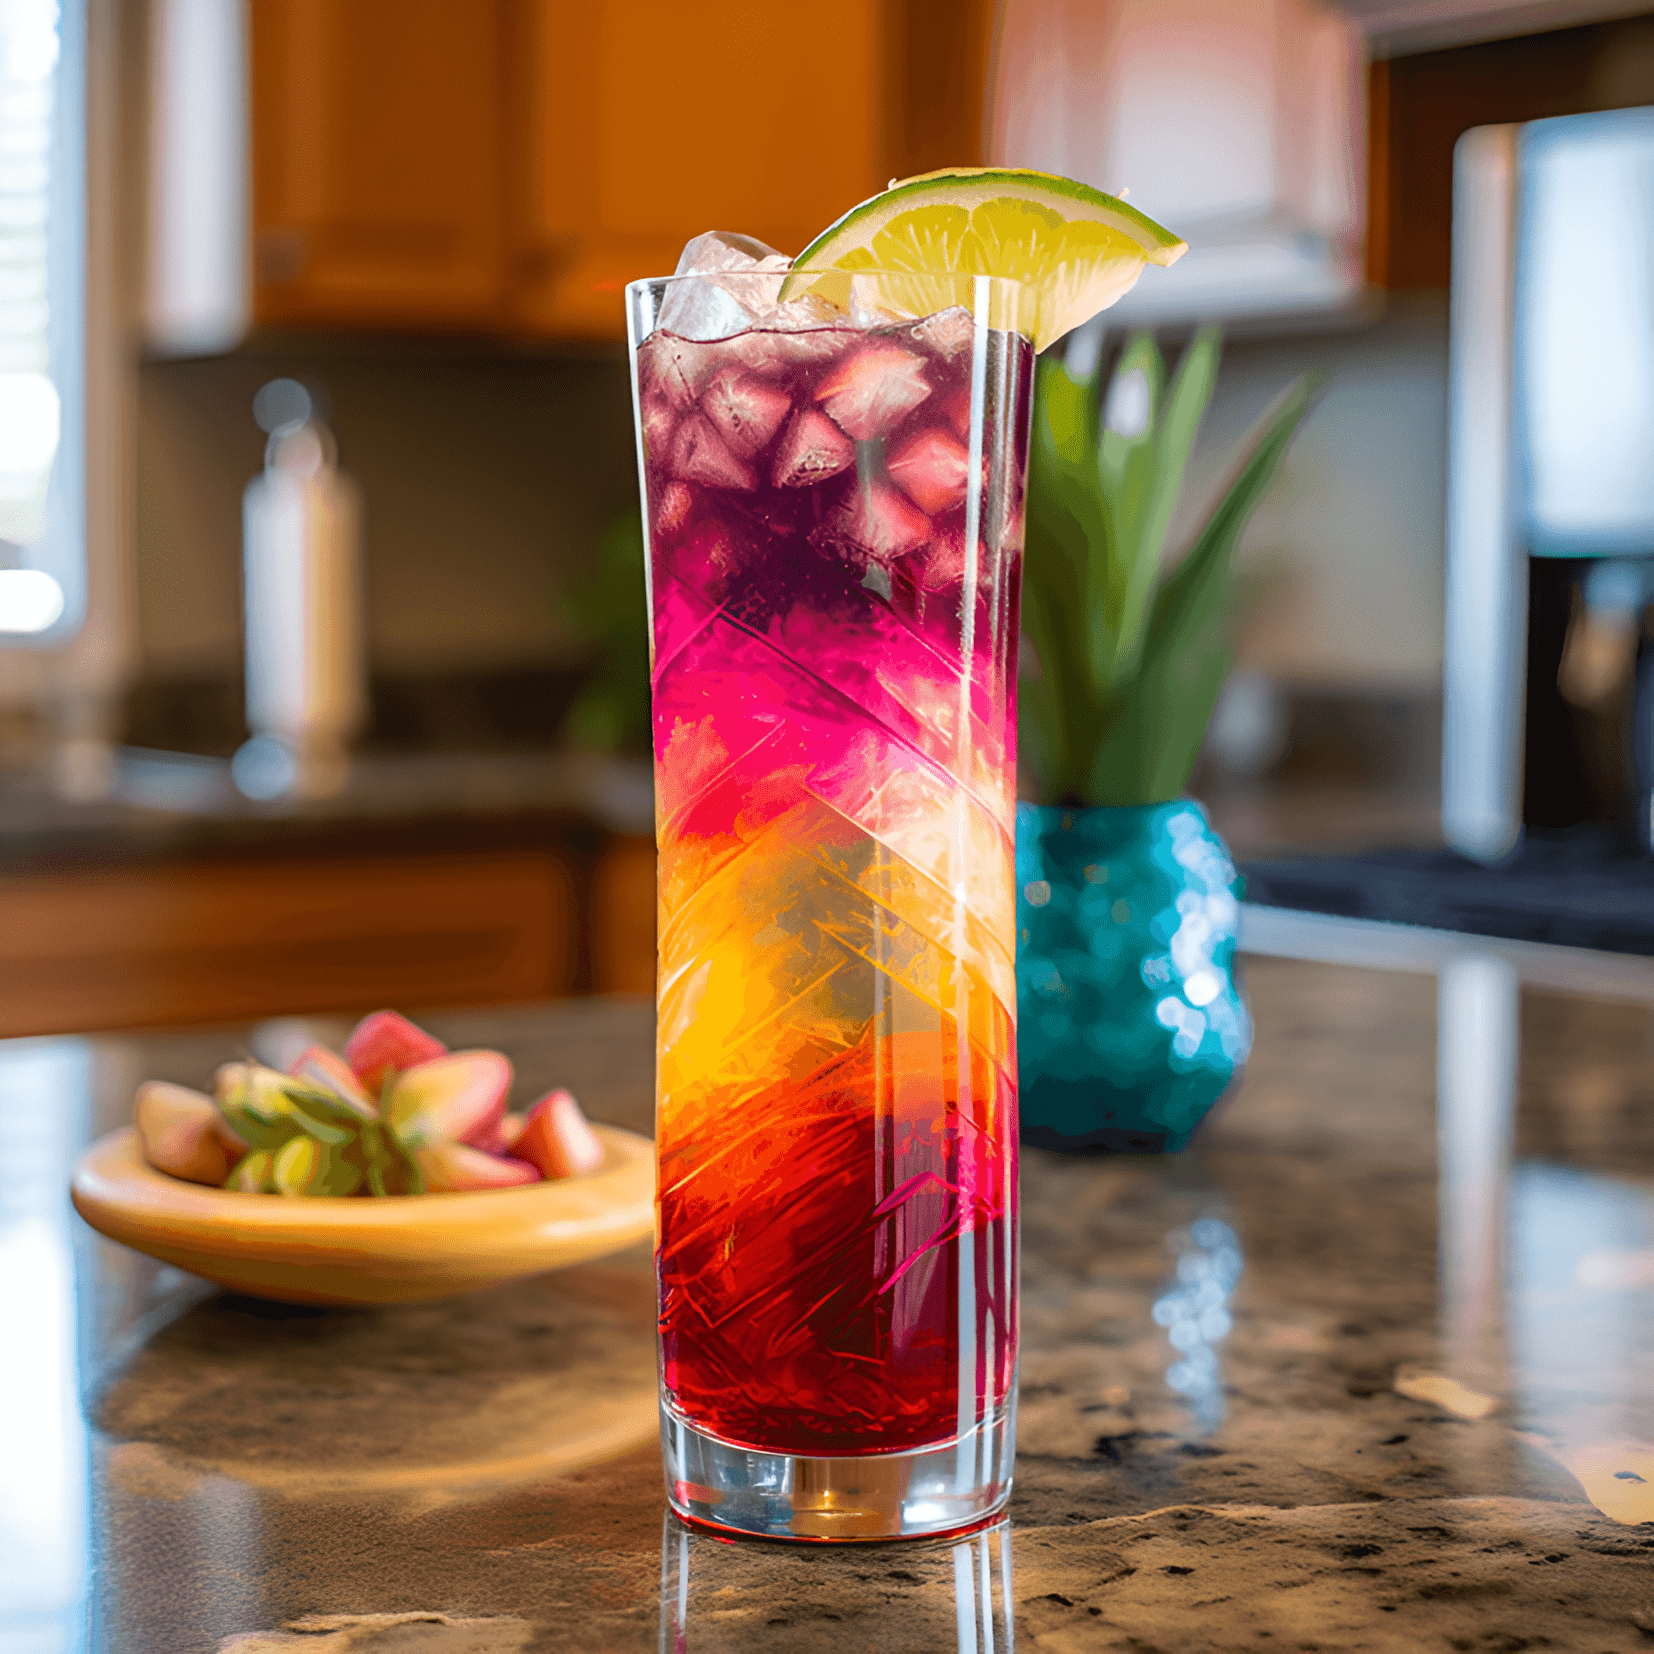 Fiesta Cocktail Recipe - The Fiesta cocktail offers a delightful blend of sweet, sour, and fruity flavors. The combination of citrus fruits, tequila, and grenadine creates a tangy and refreshing taste, while the addition of pineapple juice adds a touch of tropical sweetness. The drink is well-balanced, with a slight kick from the tequila.